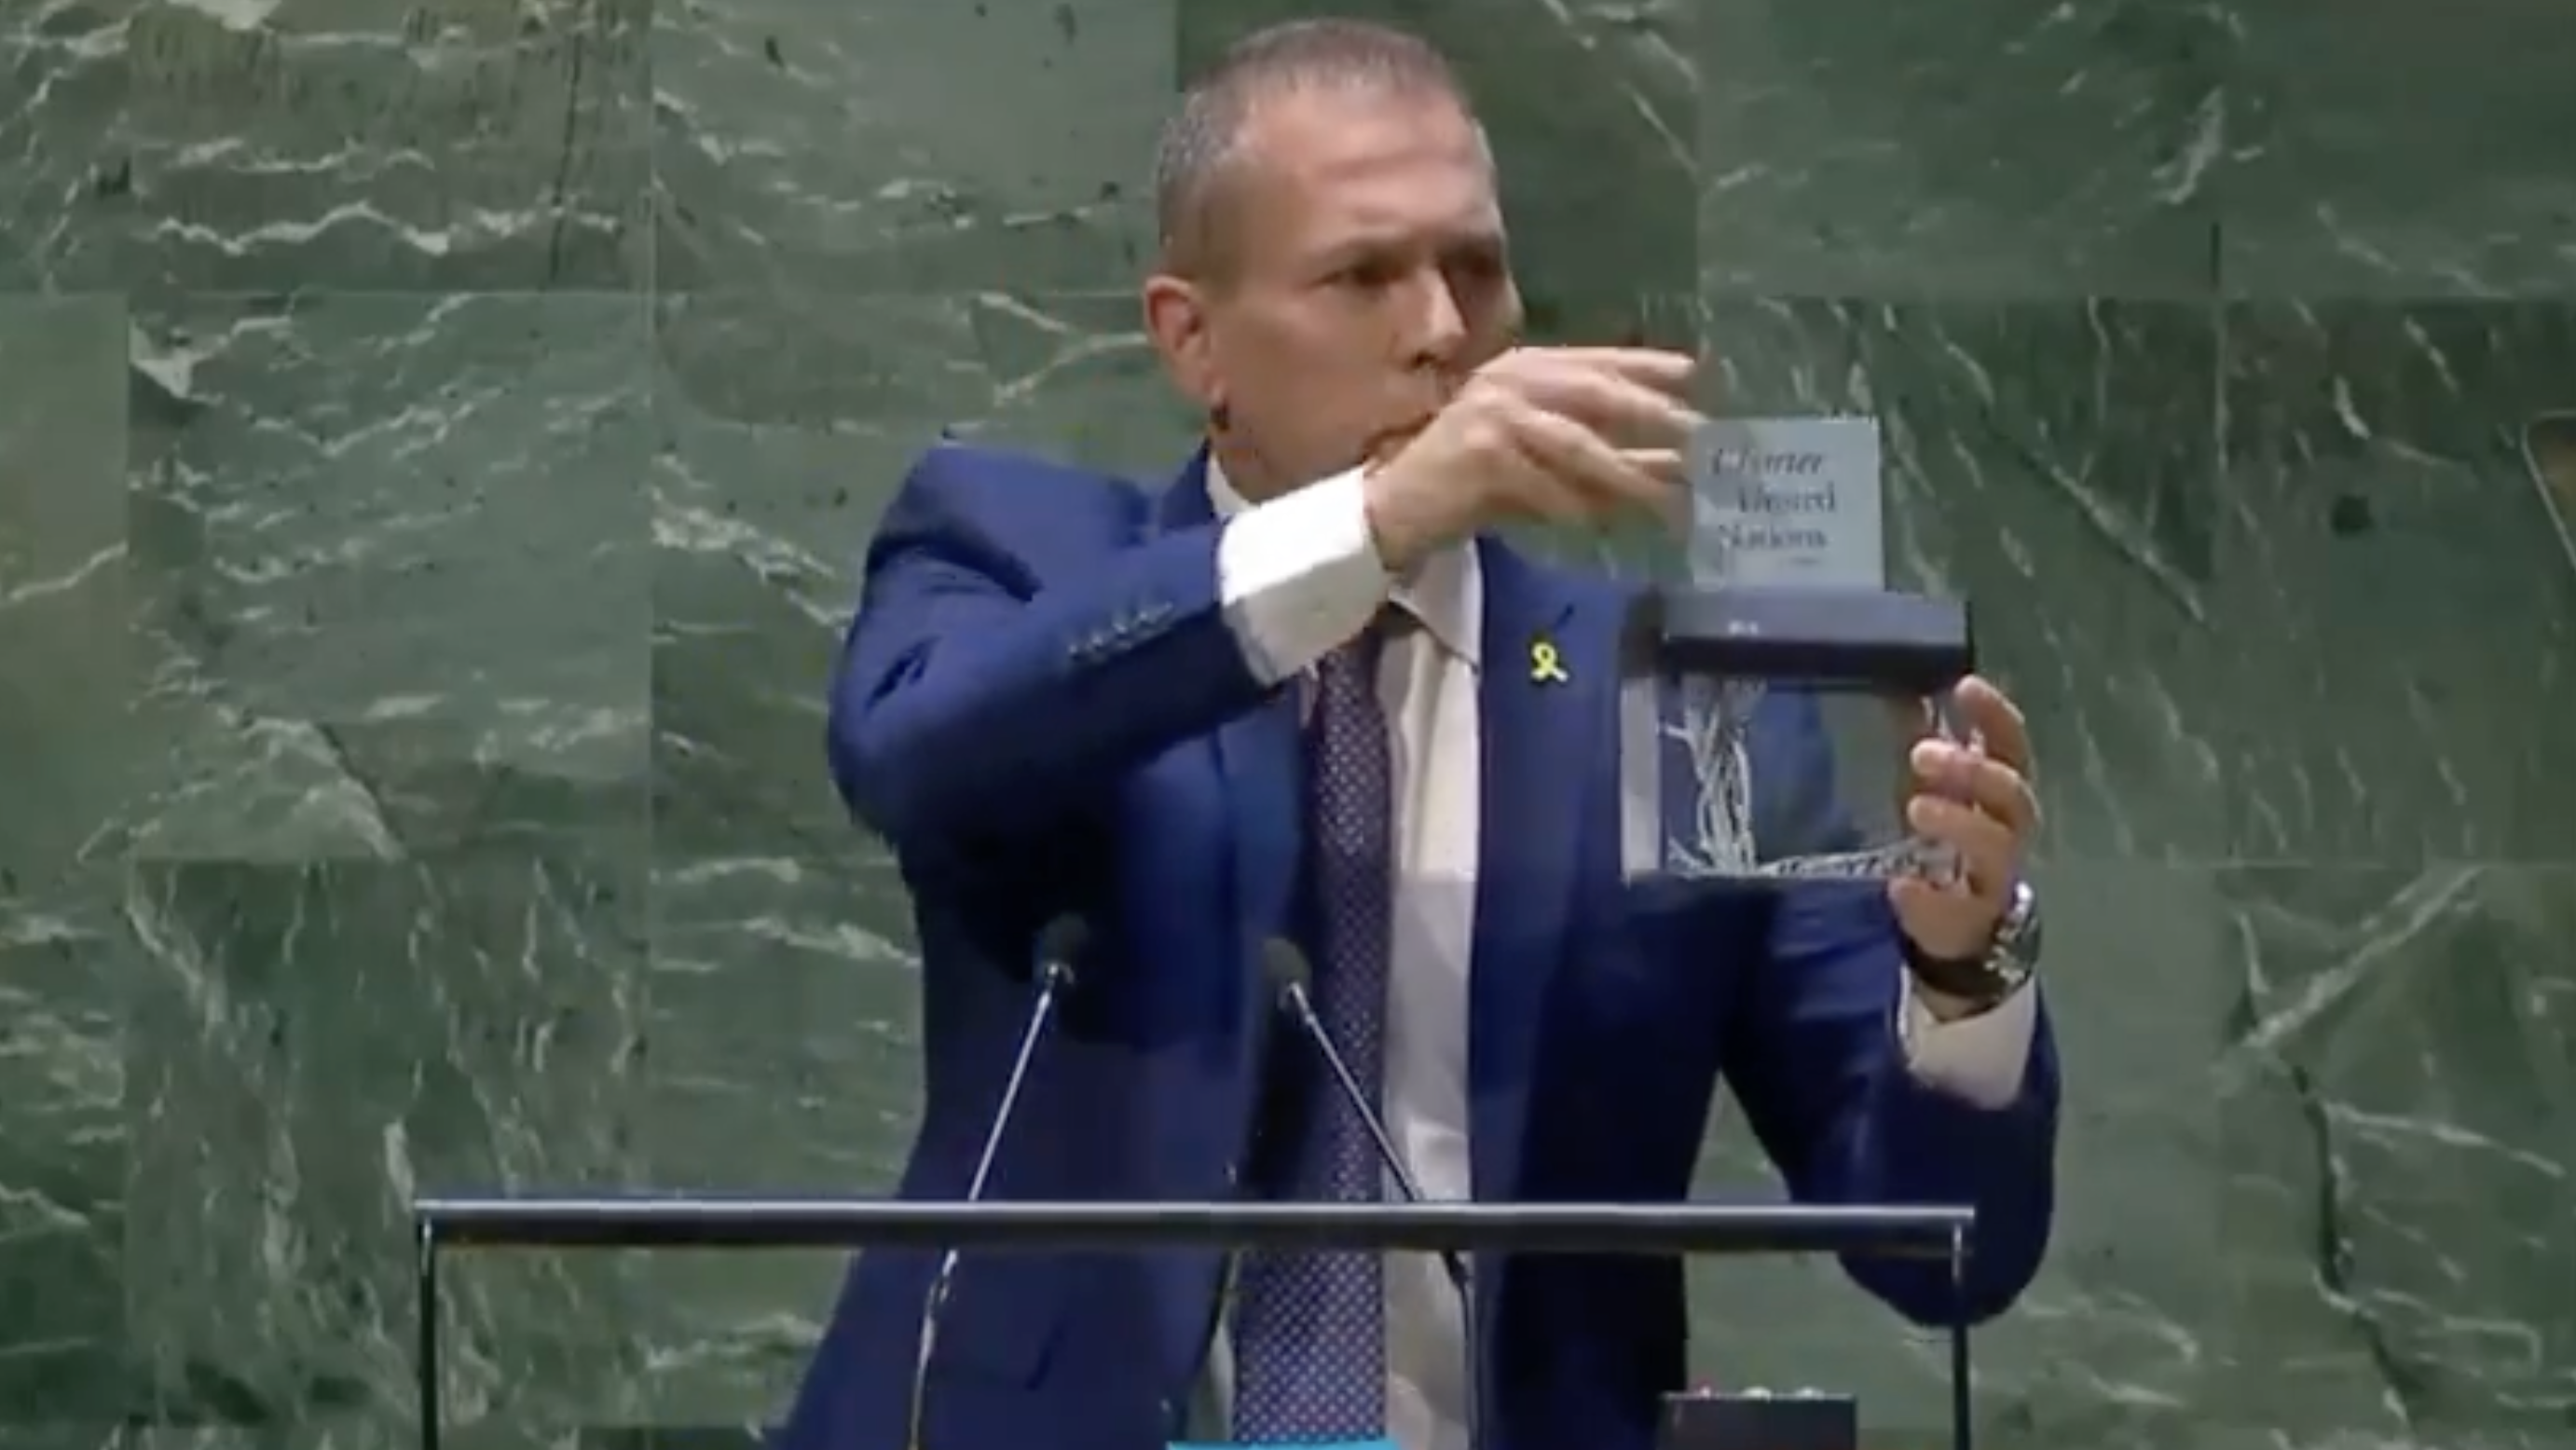 WATCH: Israeli Ambassador Shreds UN Charter To Protest Vote Giving New Privileges to Palestinians